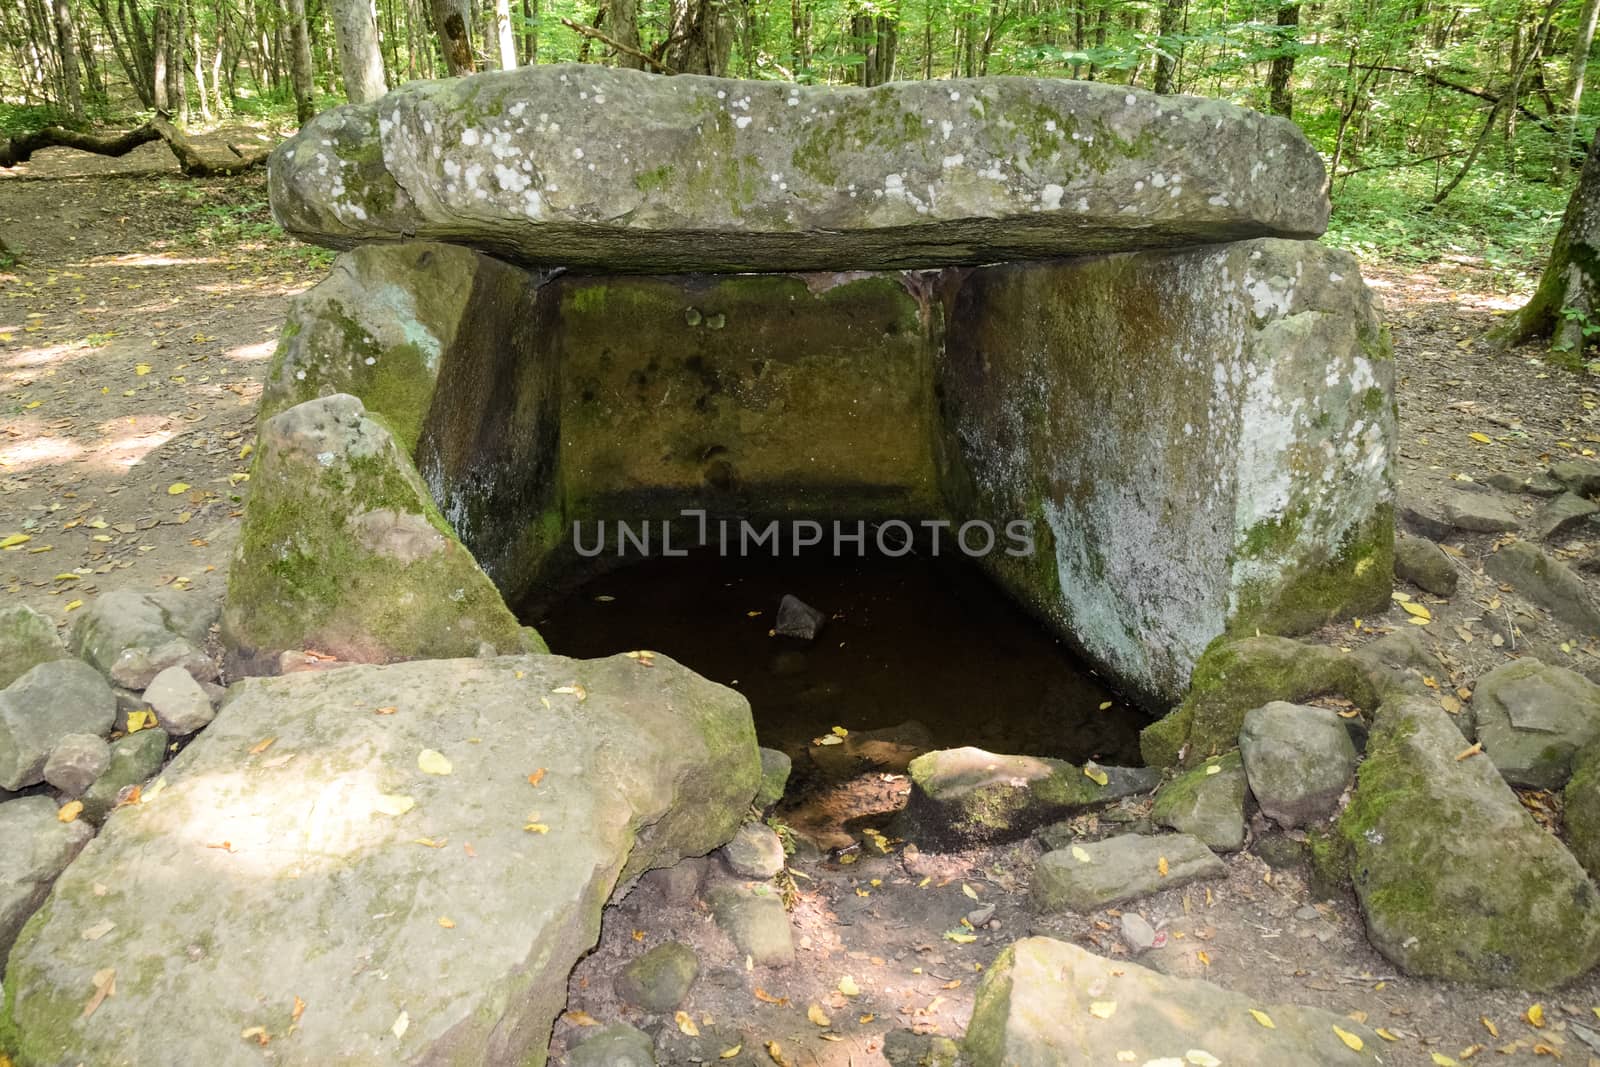 Dolmen in Shapsug. Forest in the city near the village of Shapsugskaya, the sights are dolmens and ruins of ancient civilization.